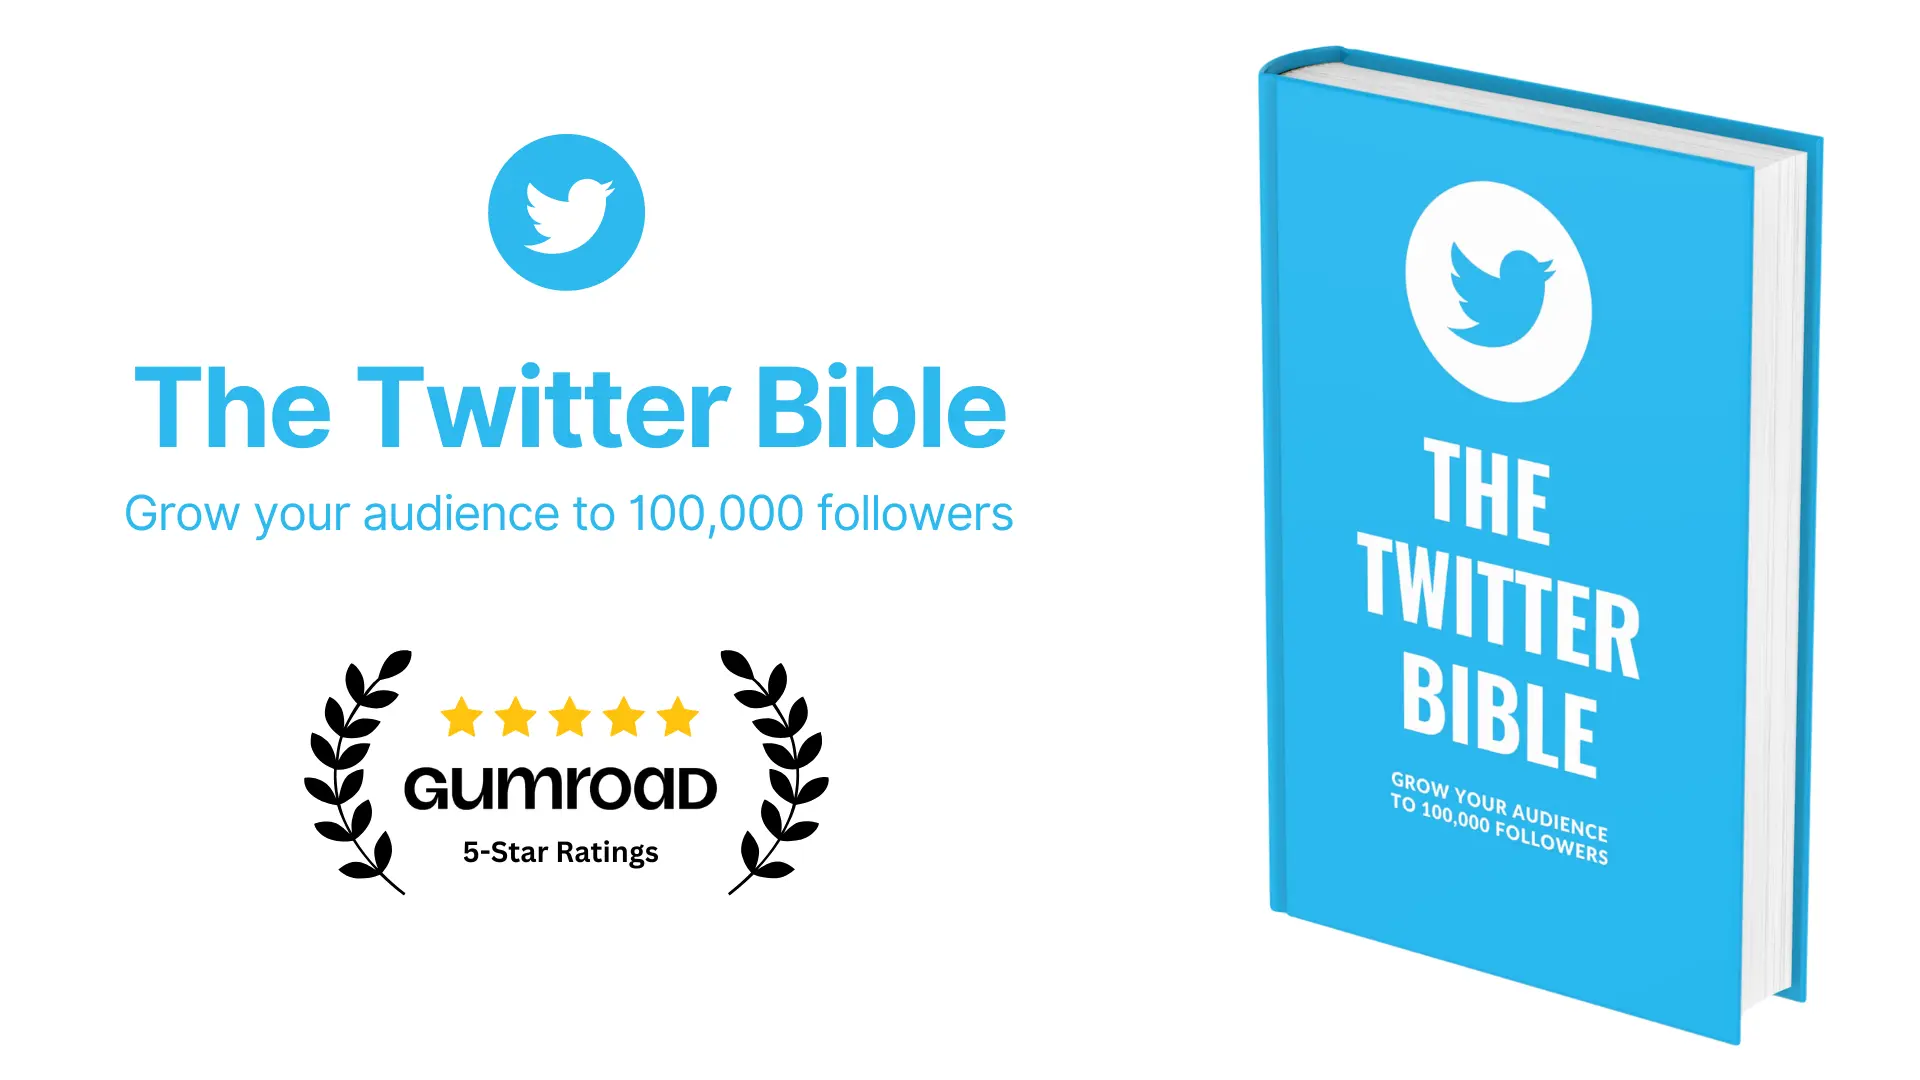 The Twitter Bible image